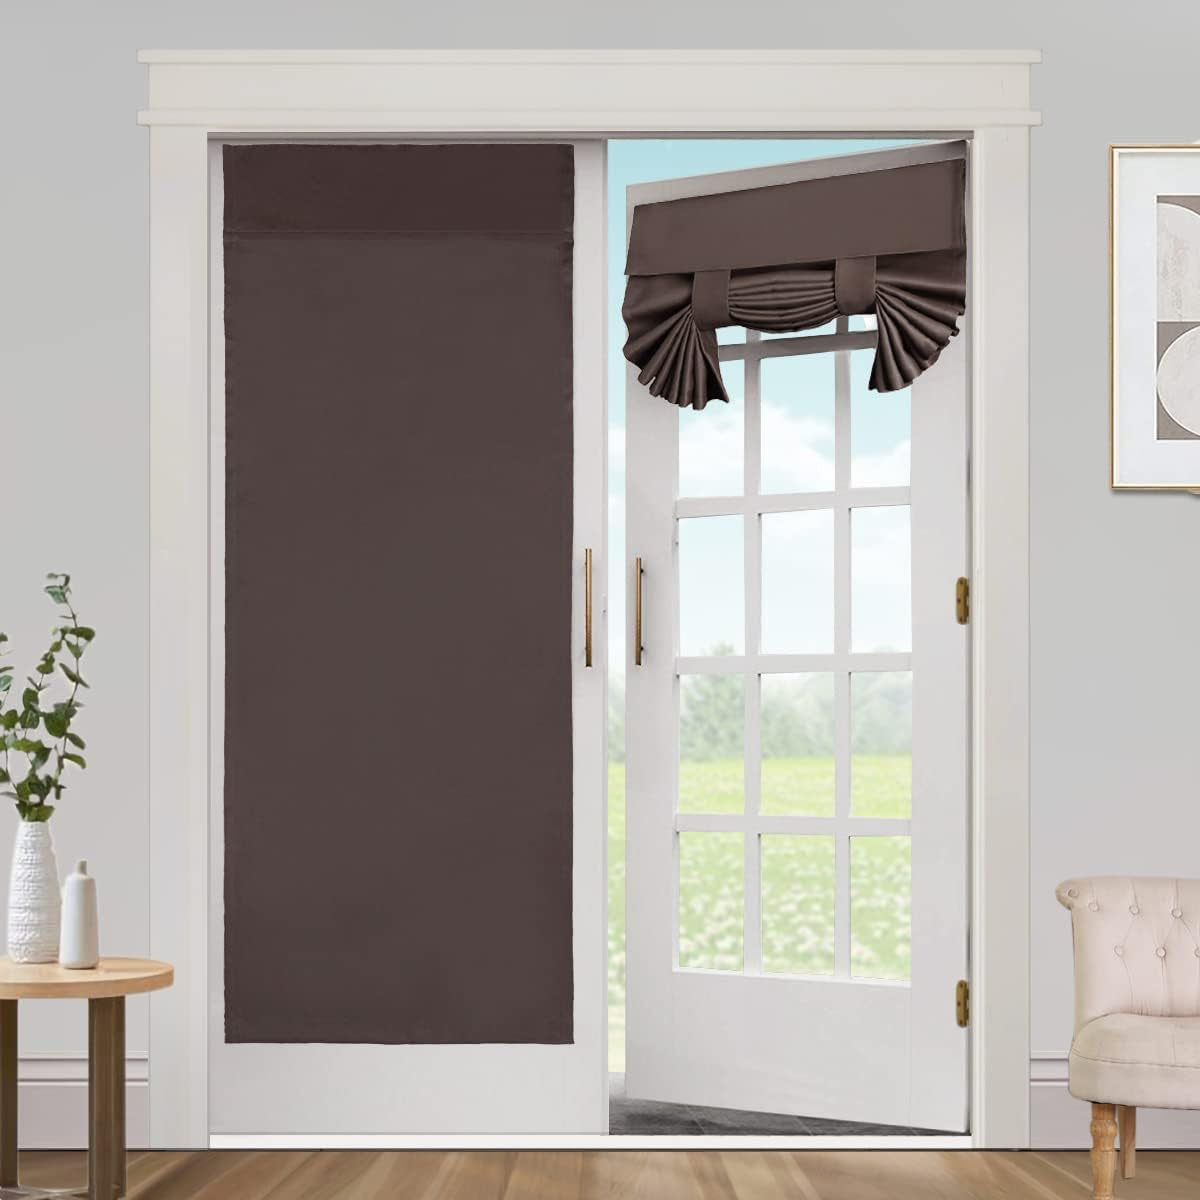 Blackout Curtains for French Doors - Thermal Insulated Tricia Door Window Curtain for Patio Door, Self Stick Tie up Shade Energy Efficient Double Door Blind, 26 X 68 Inches, 1 Panel, Sage  L.VICTEX Brown 2 